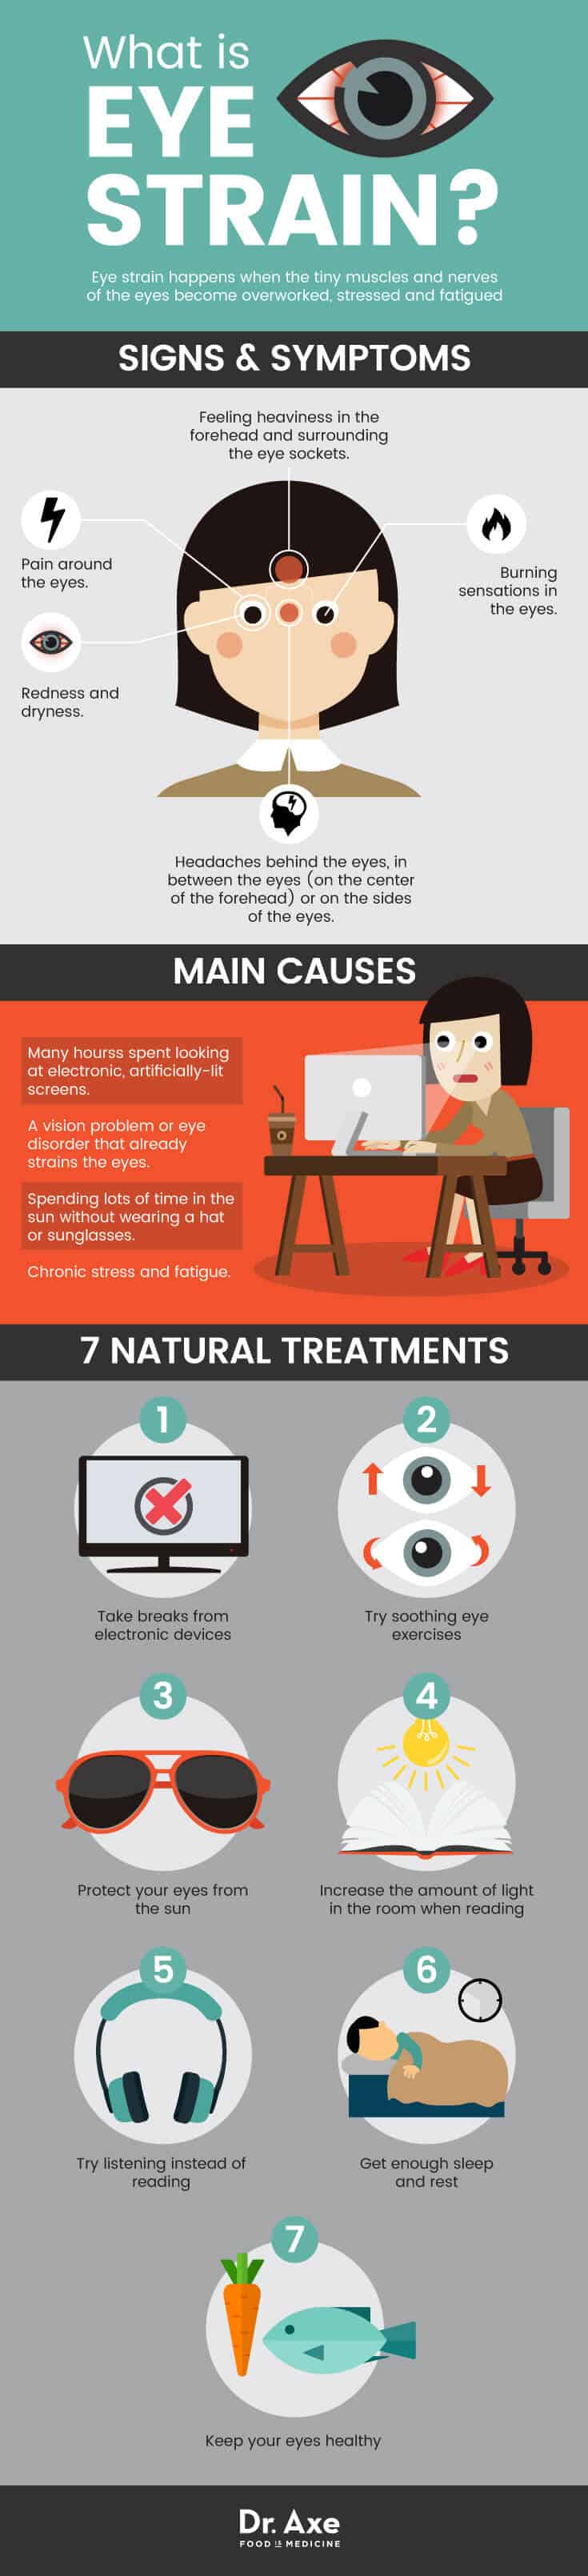 What is eye strain + natural treatments